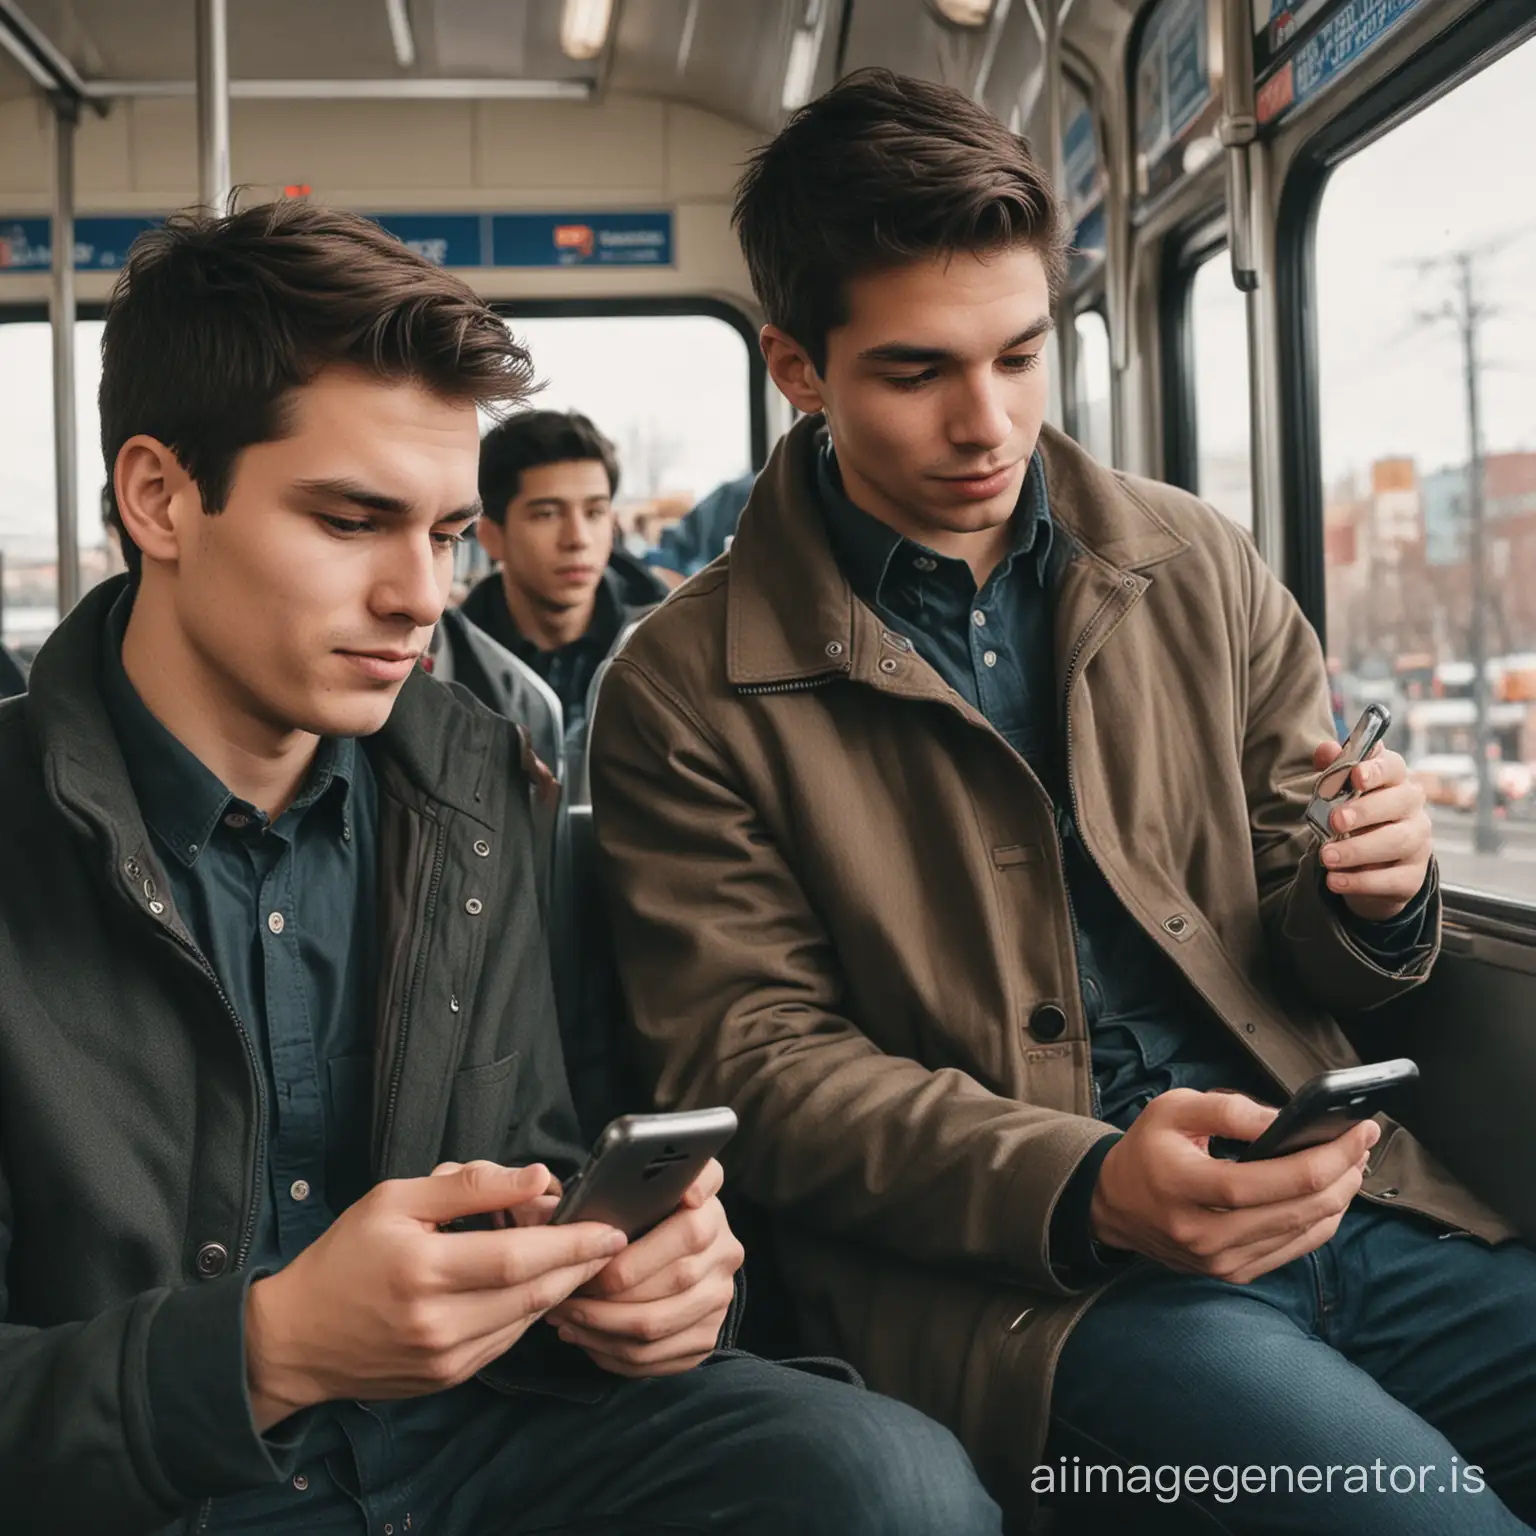 Commuters-Engrossed-in-Smartphones-on-Public-Transportation